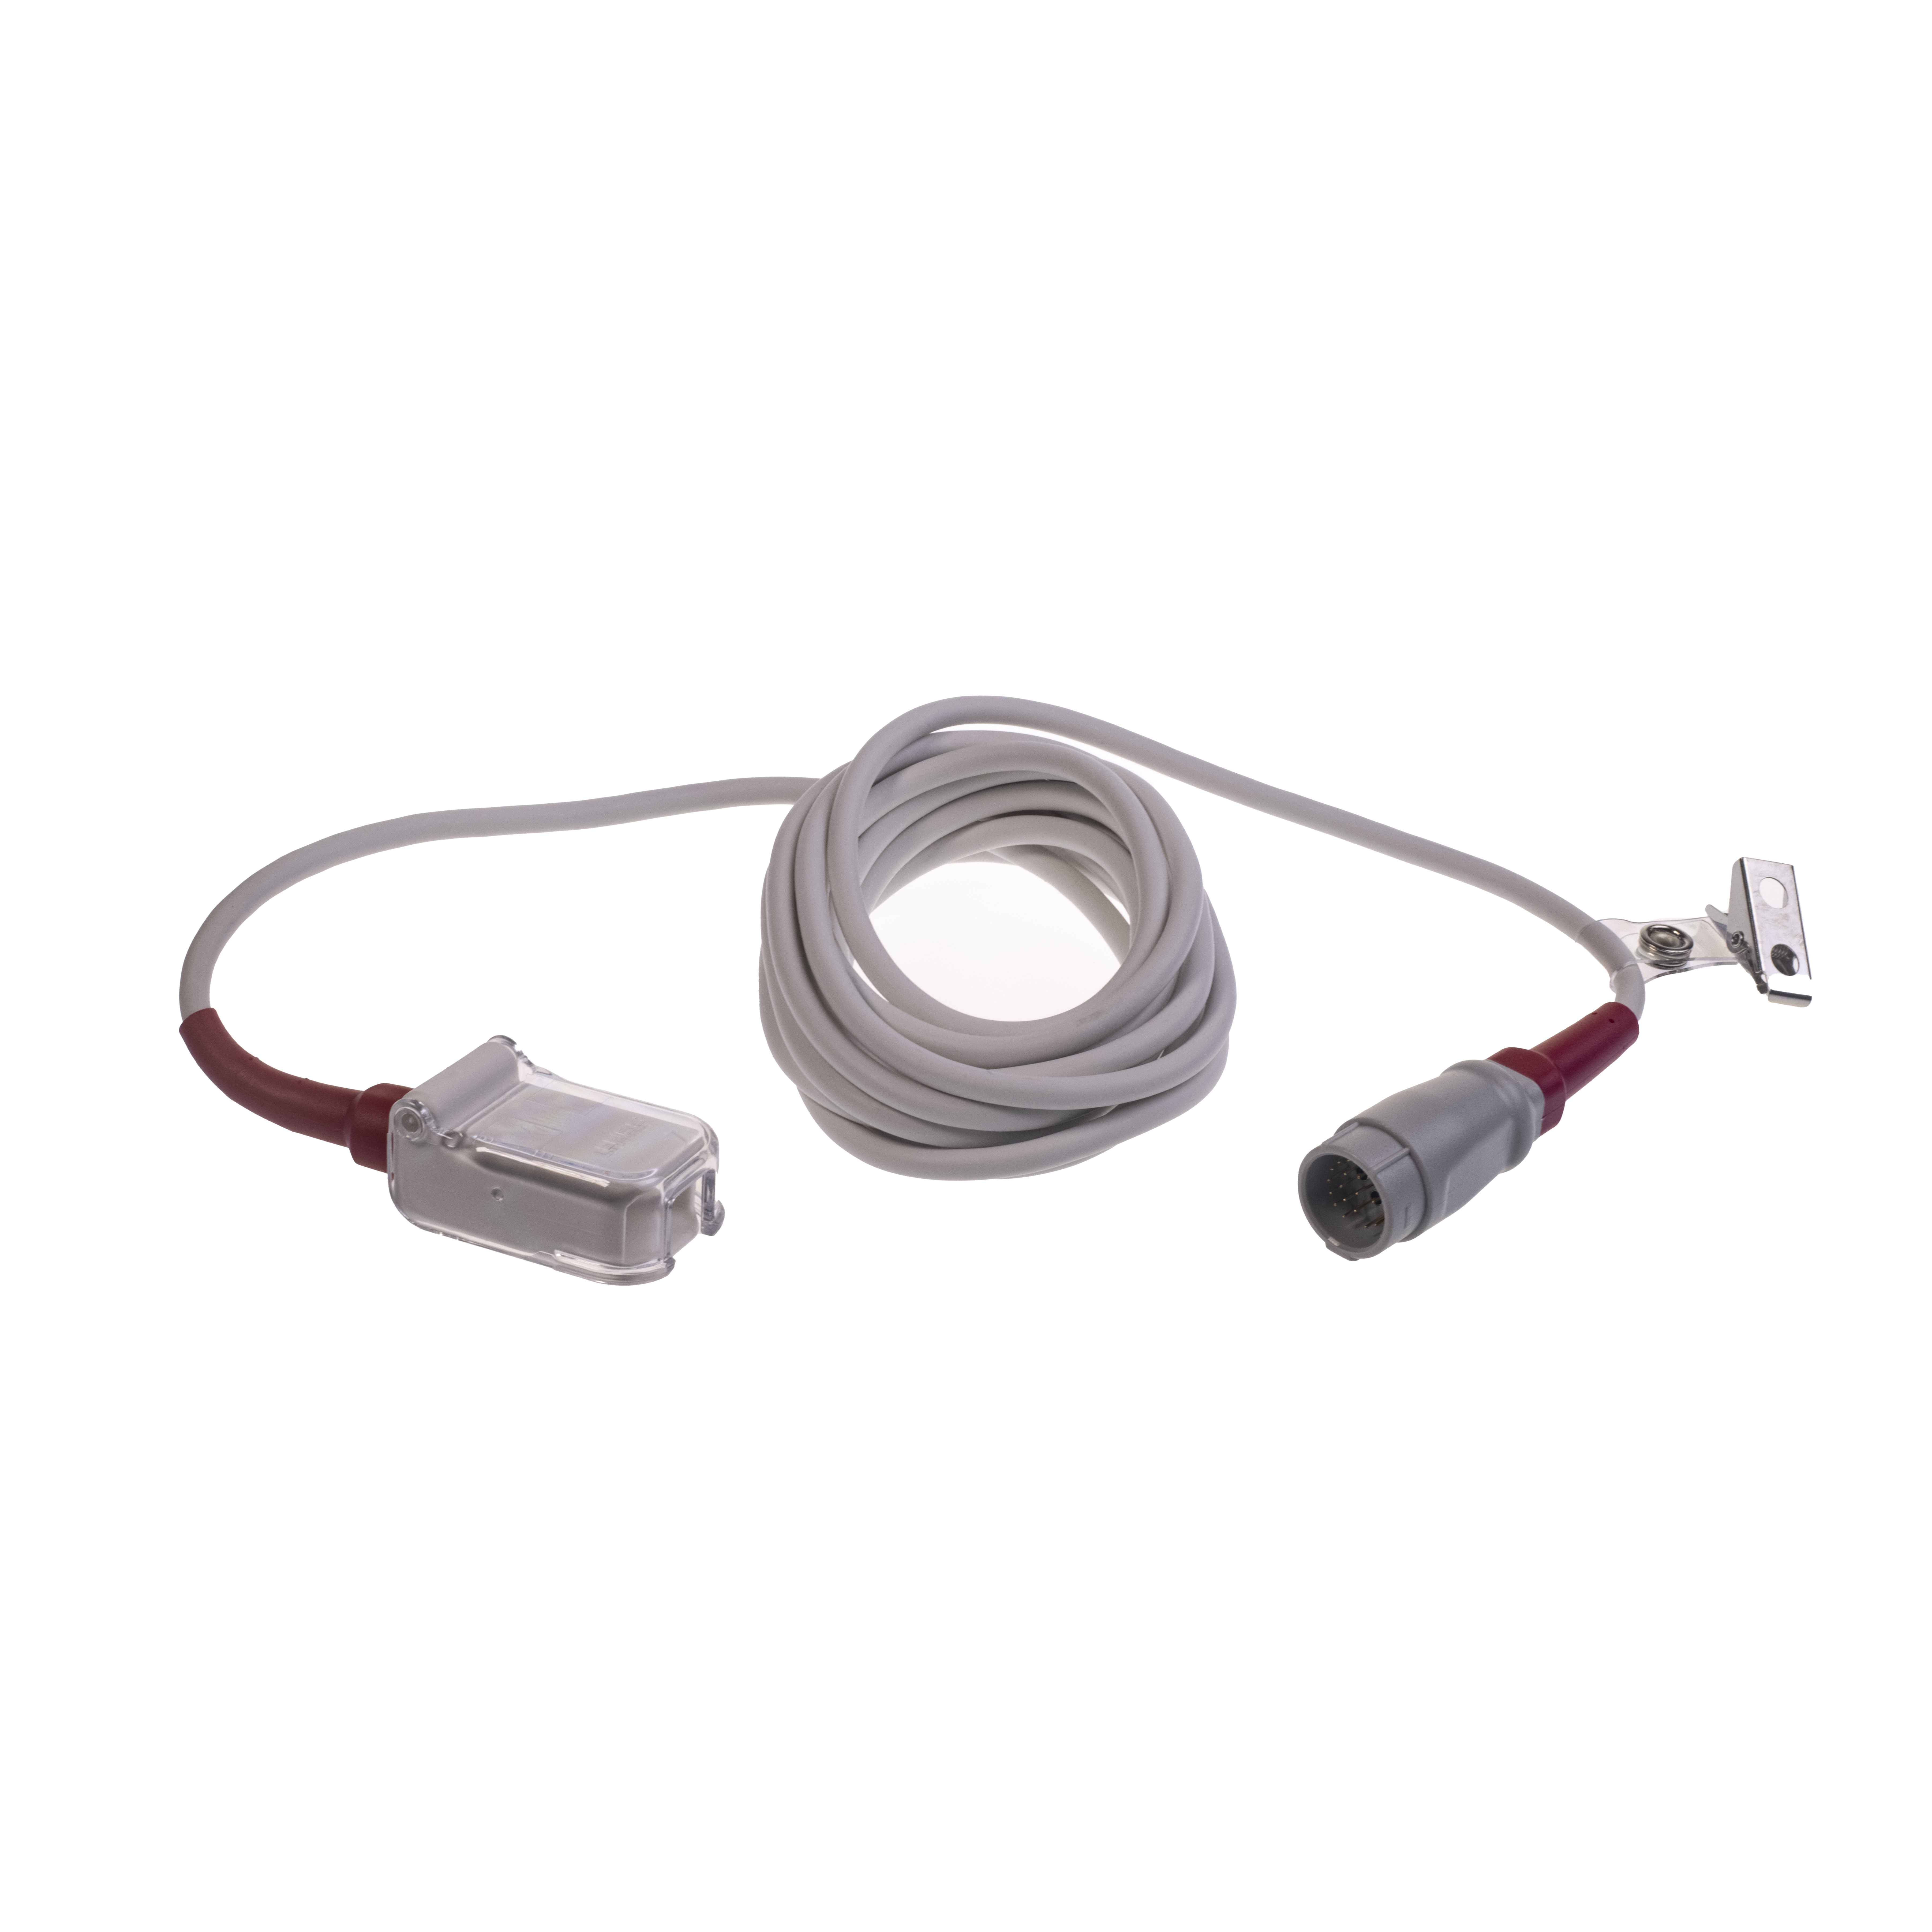 Masimo LNCS Cable, LNC-10, 10-Foot ( Requires 2103987-001 or -002 )